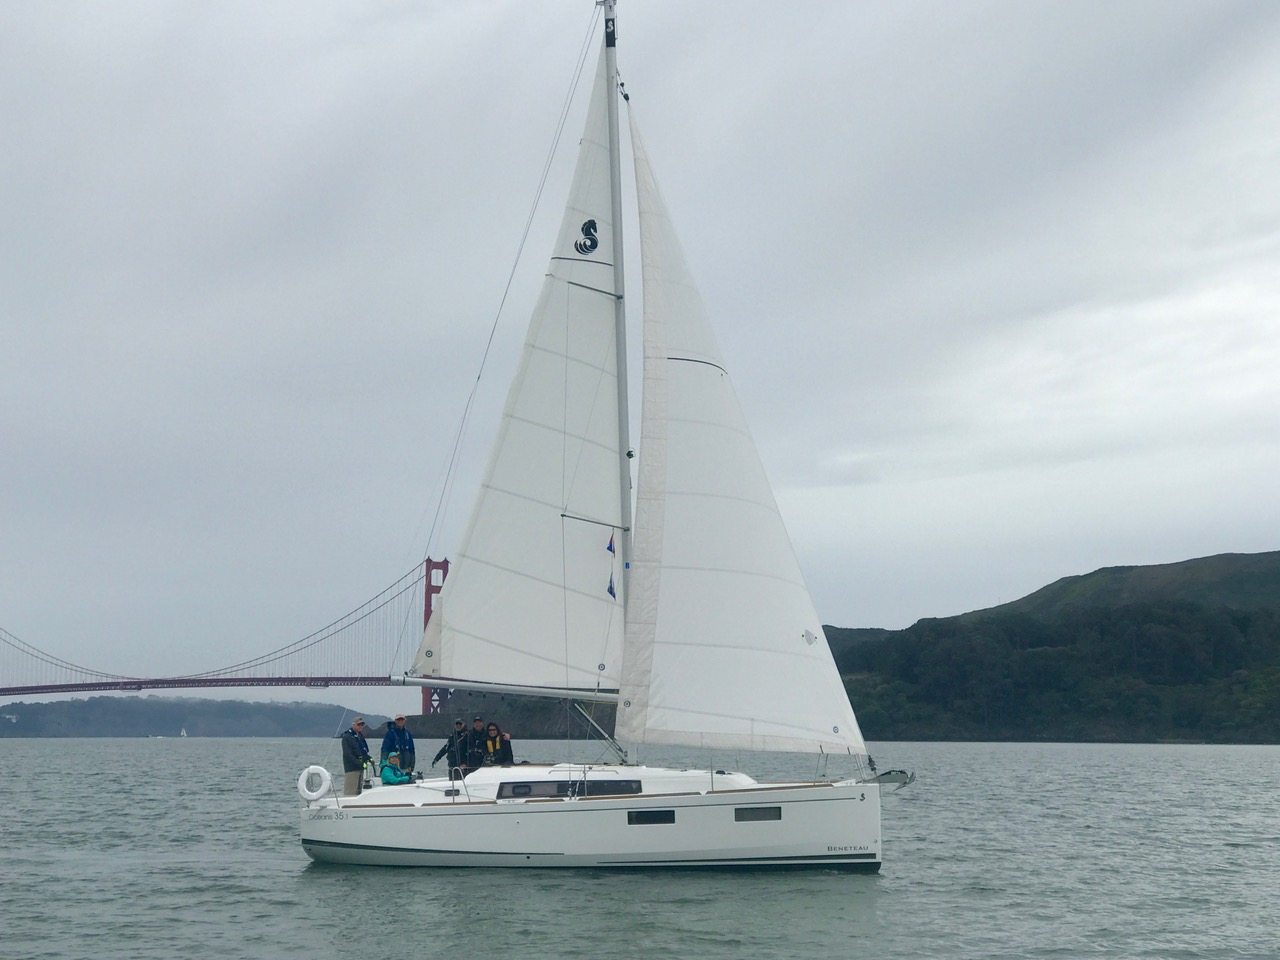 Beneteau 35.1 Lei Over sailing past the Golden Gate